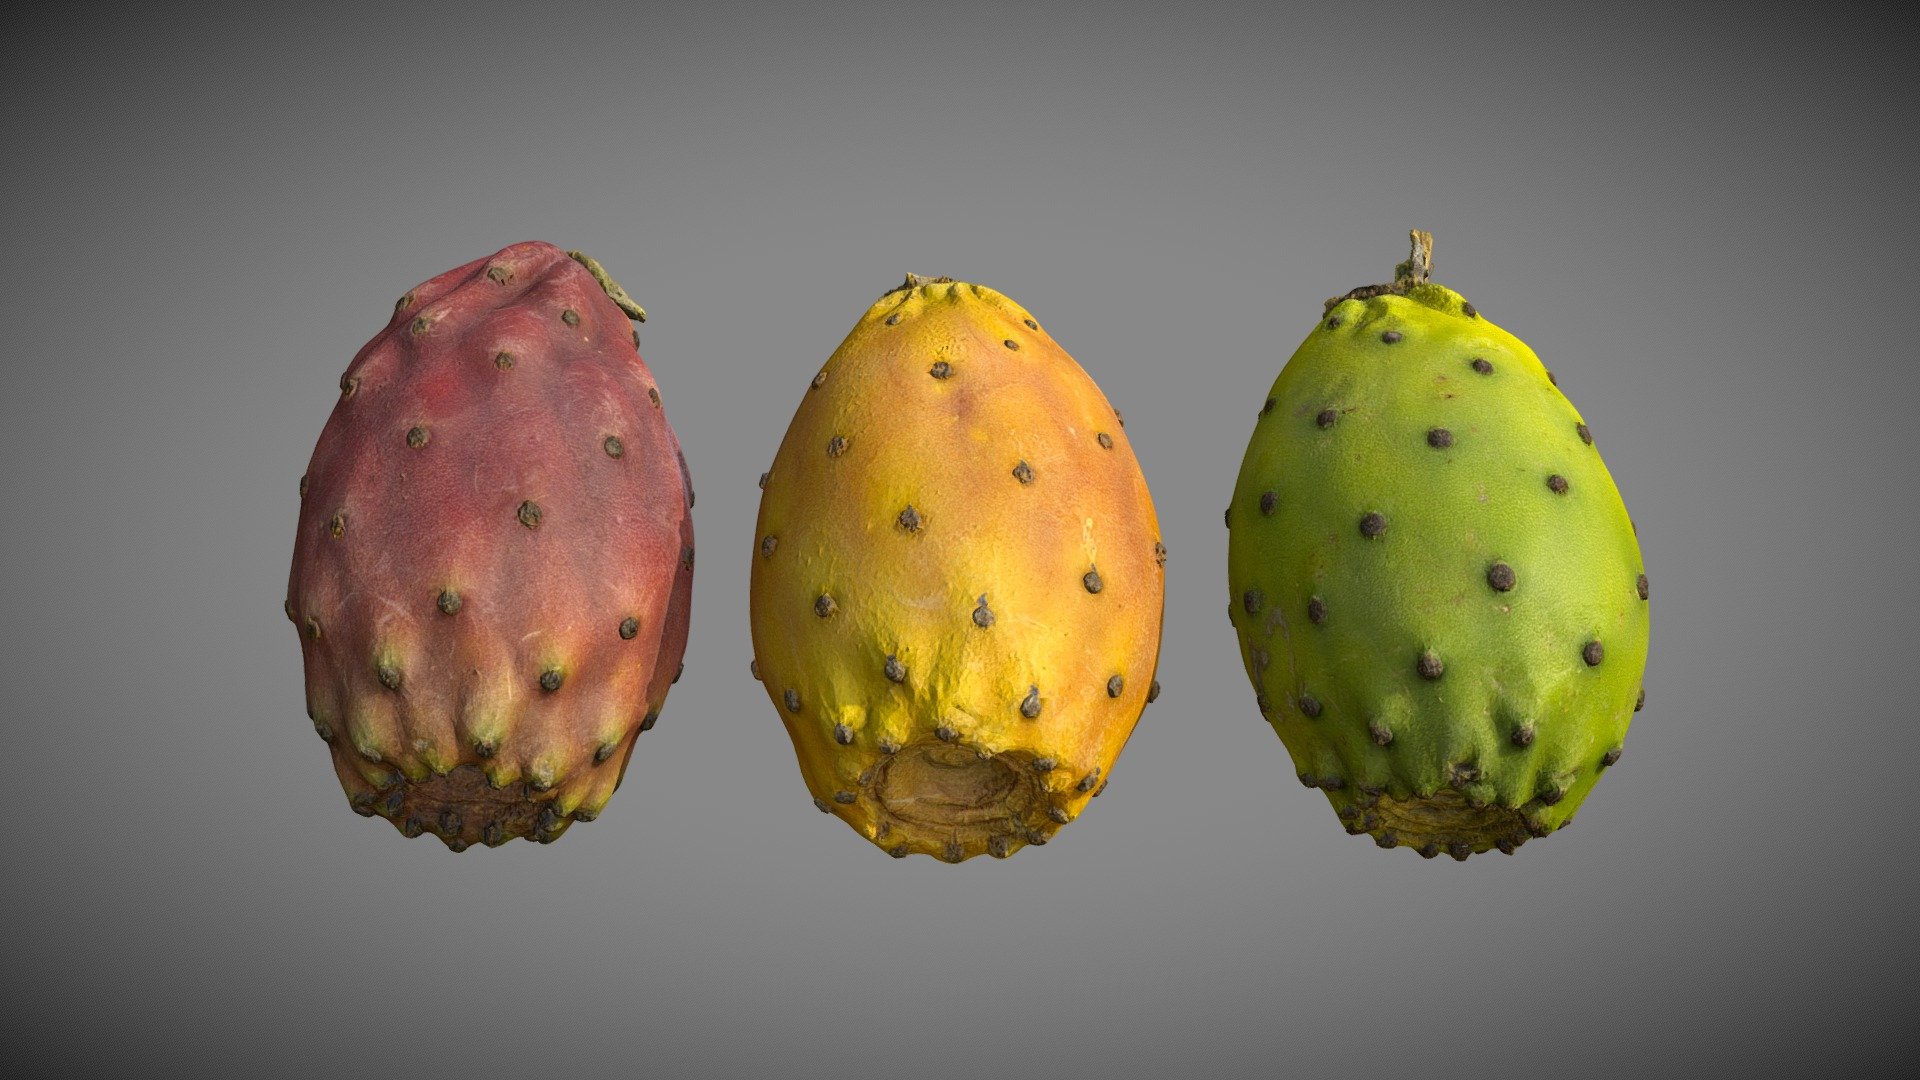 Scan of three Cactus Fruits / Prickly Pears / Barbary Figs / Indian Fig Opuntia
(high-poly models included)

Red: https://skfb.ly/oNn8A

Yellow: https://skfb.ly/oNn8B

Green: https://skfb.ly/oNn8D - Three Prickly Pears - Buy Royalty Free 3D model by Eydeet 3d model